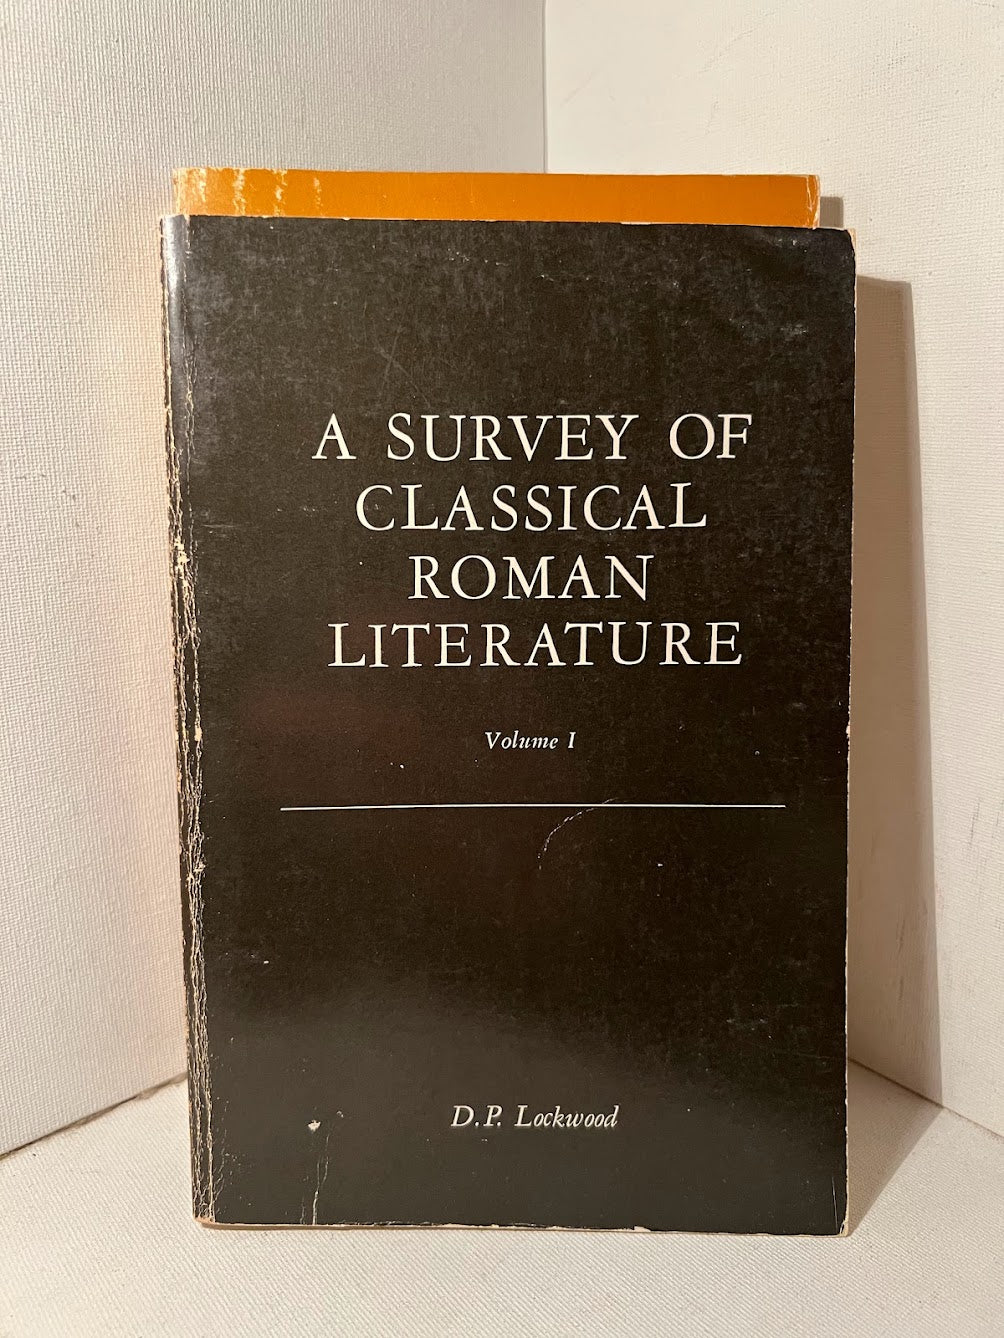 A Survey of Classical Roman Literature by D.P. Lockwood